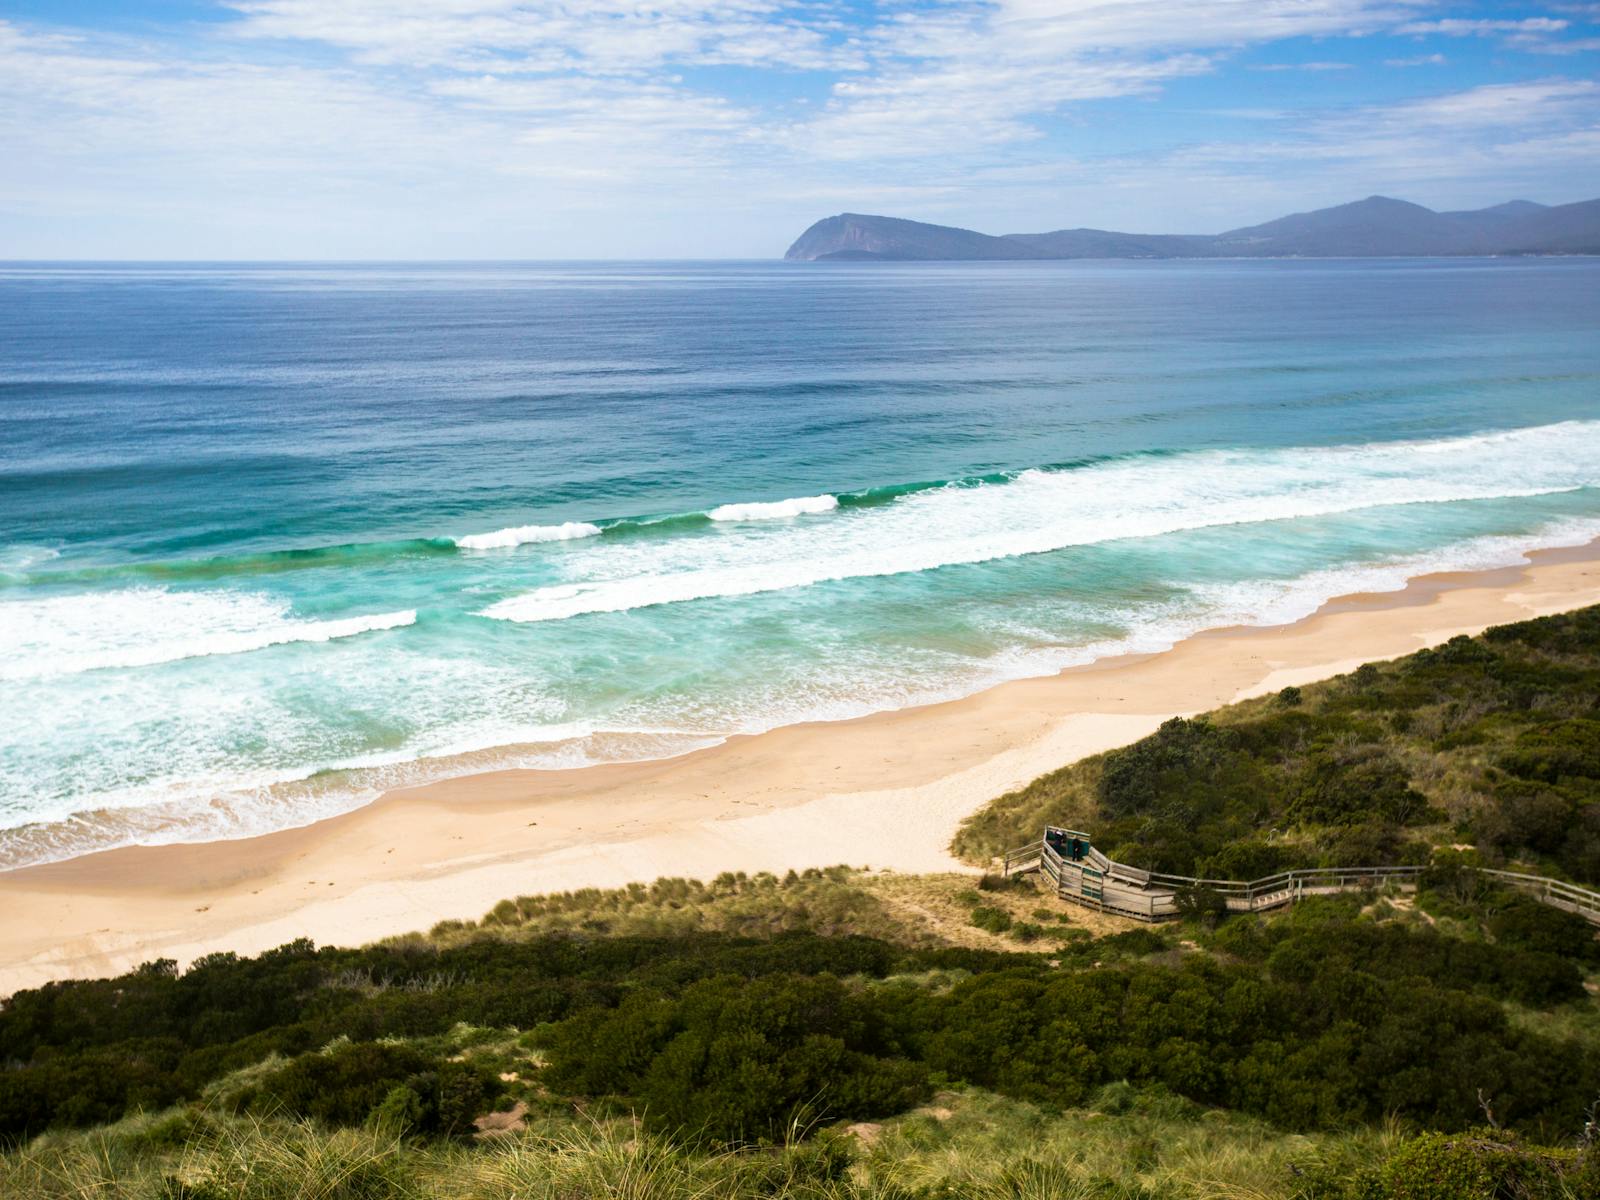 Let Adventure Trails Tasmania be your guide on a Bruny Island Discovery day tour